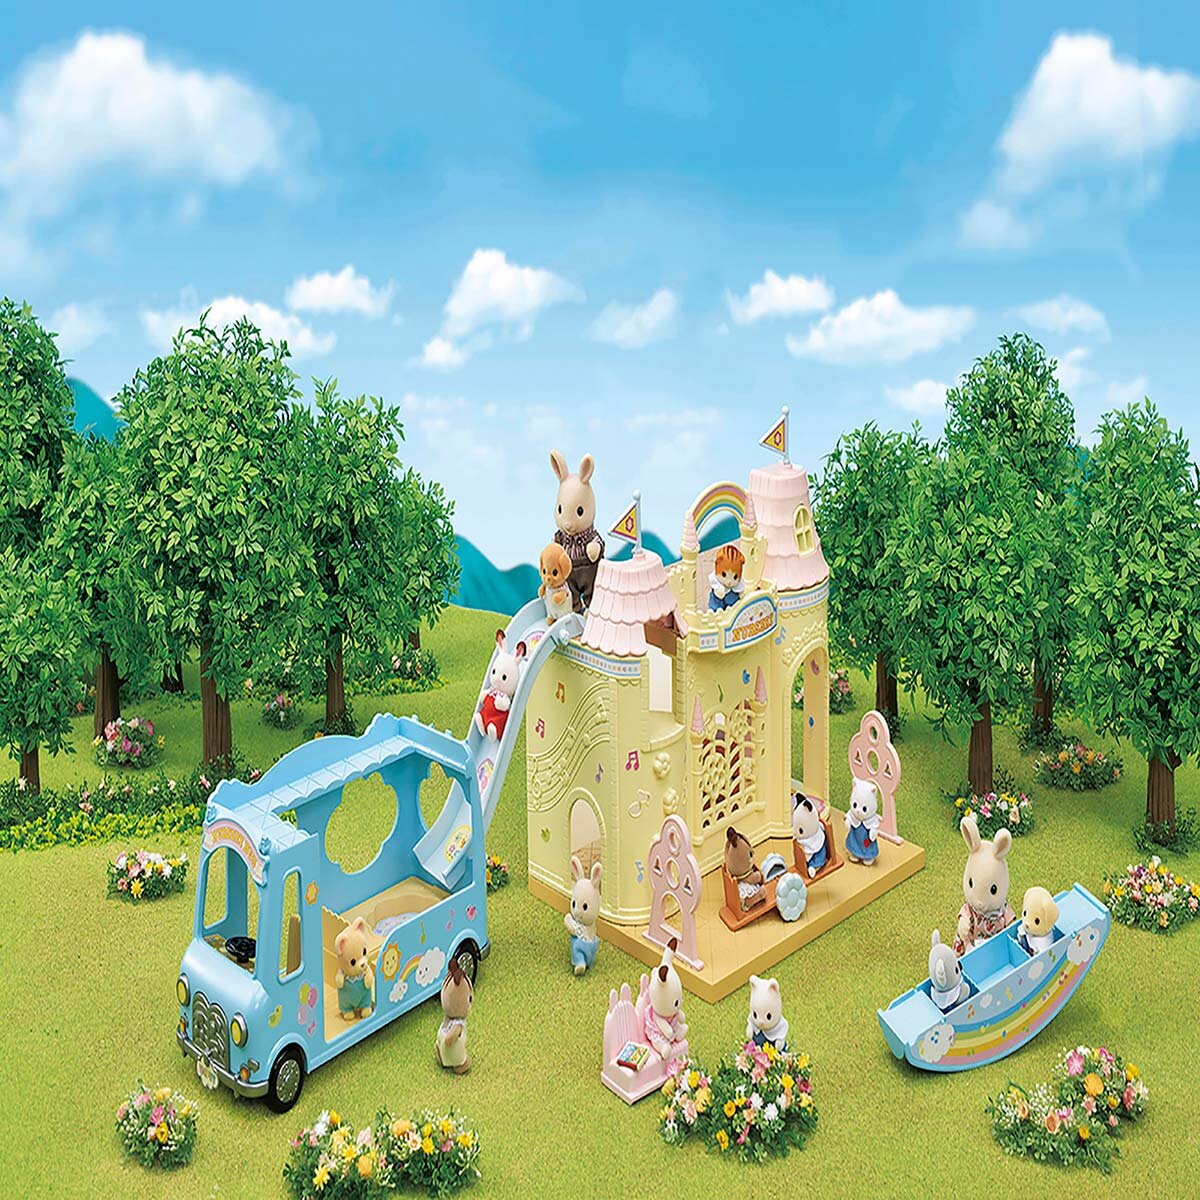 Buy Sylvanian Baby Castle Nursery Overview4 Image at Costco.co.uk